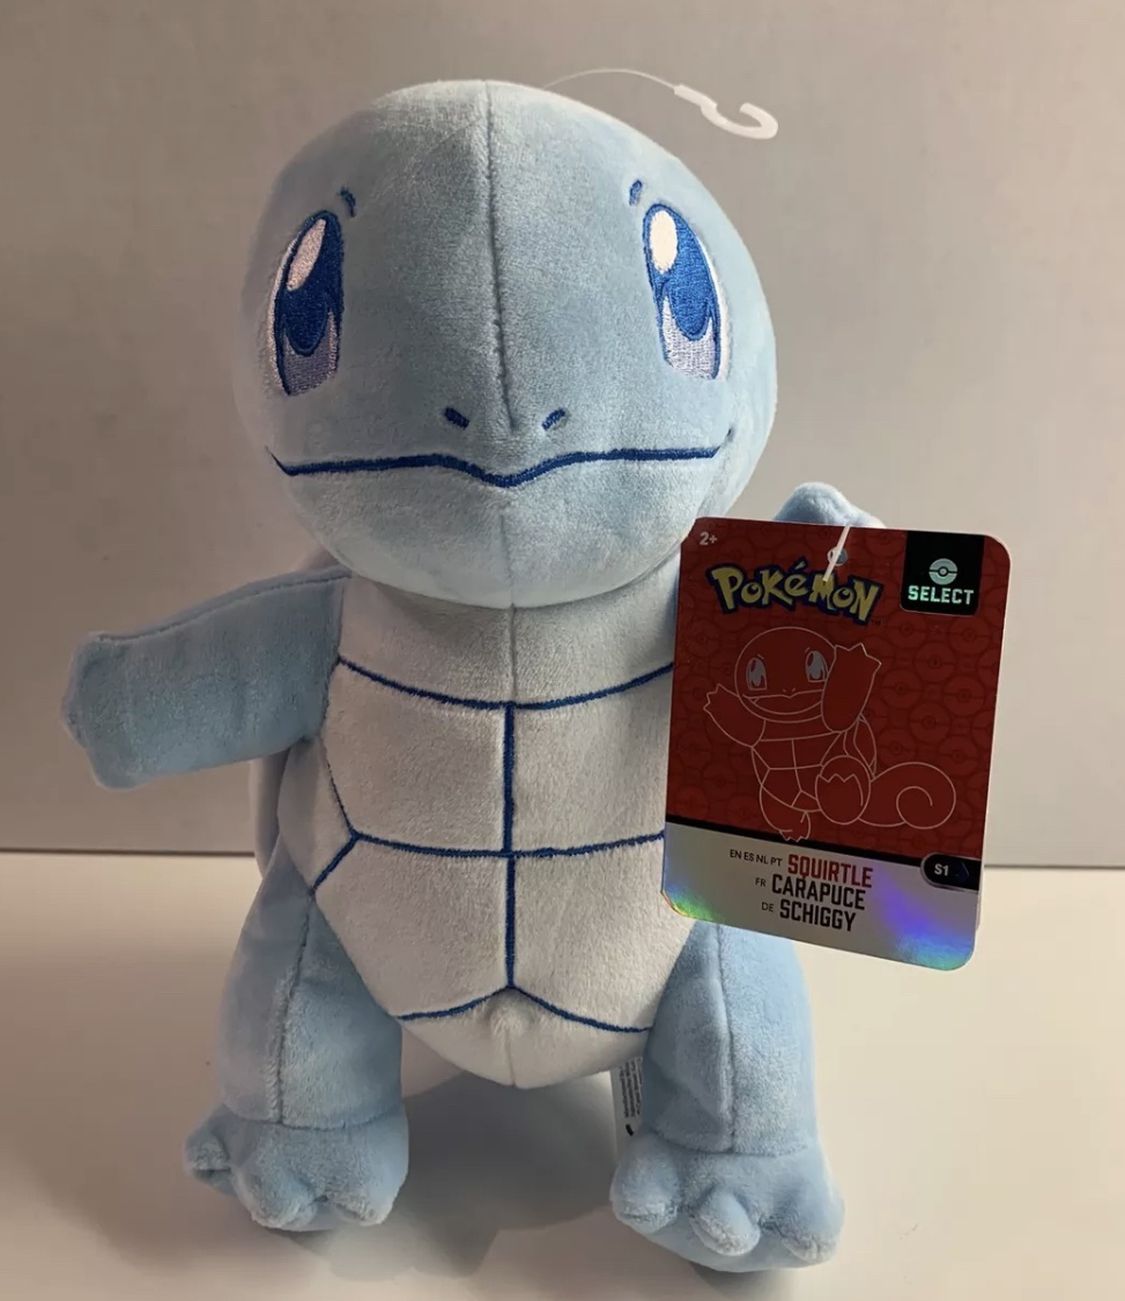 2020 Pokemon Select Shiny Squirtle Plush Wicked CoolToys 8" Rare HTF 💧